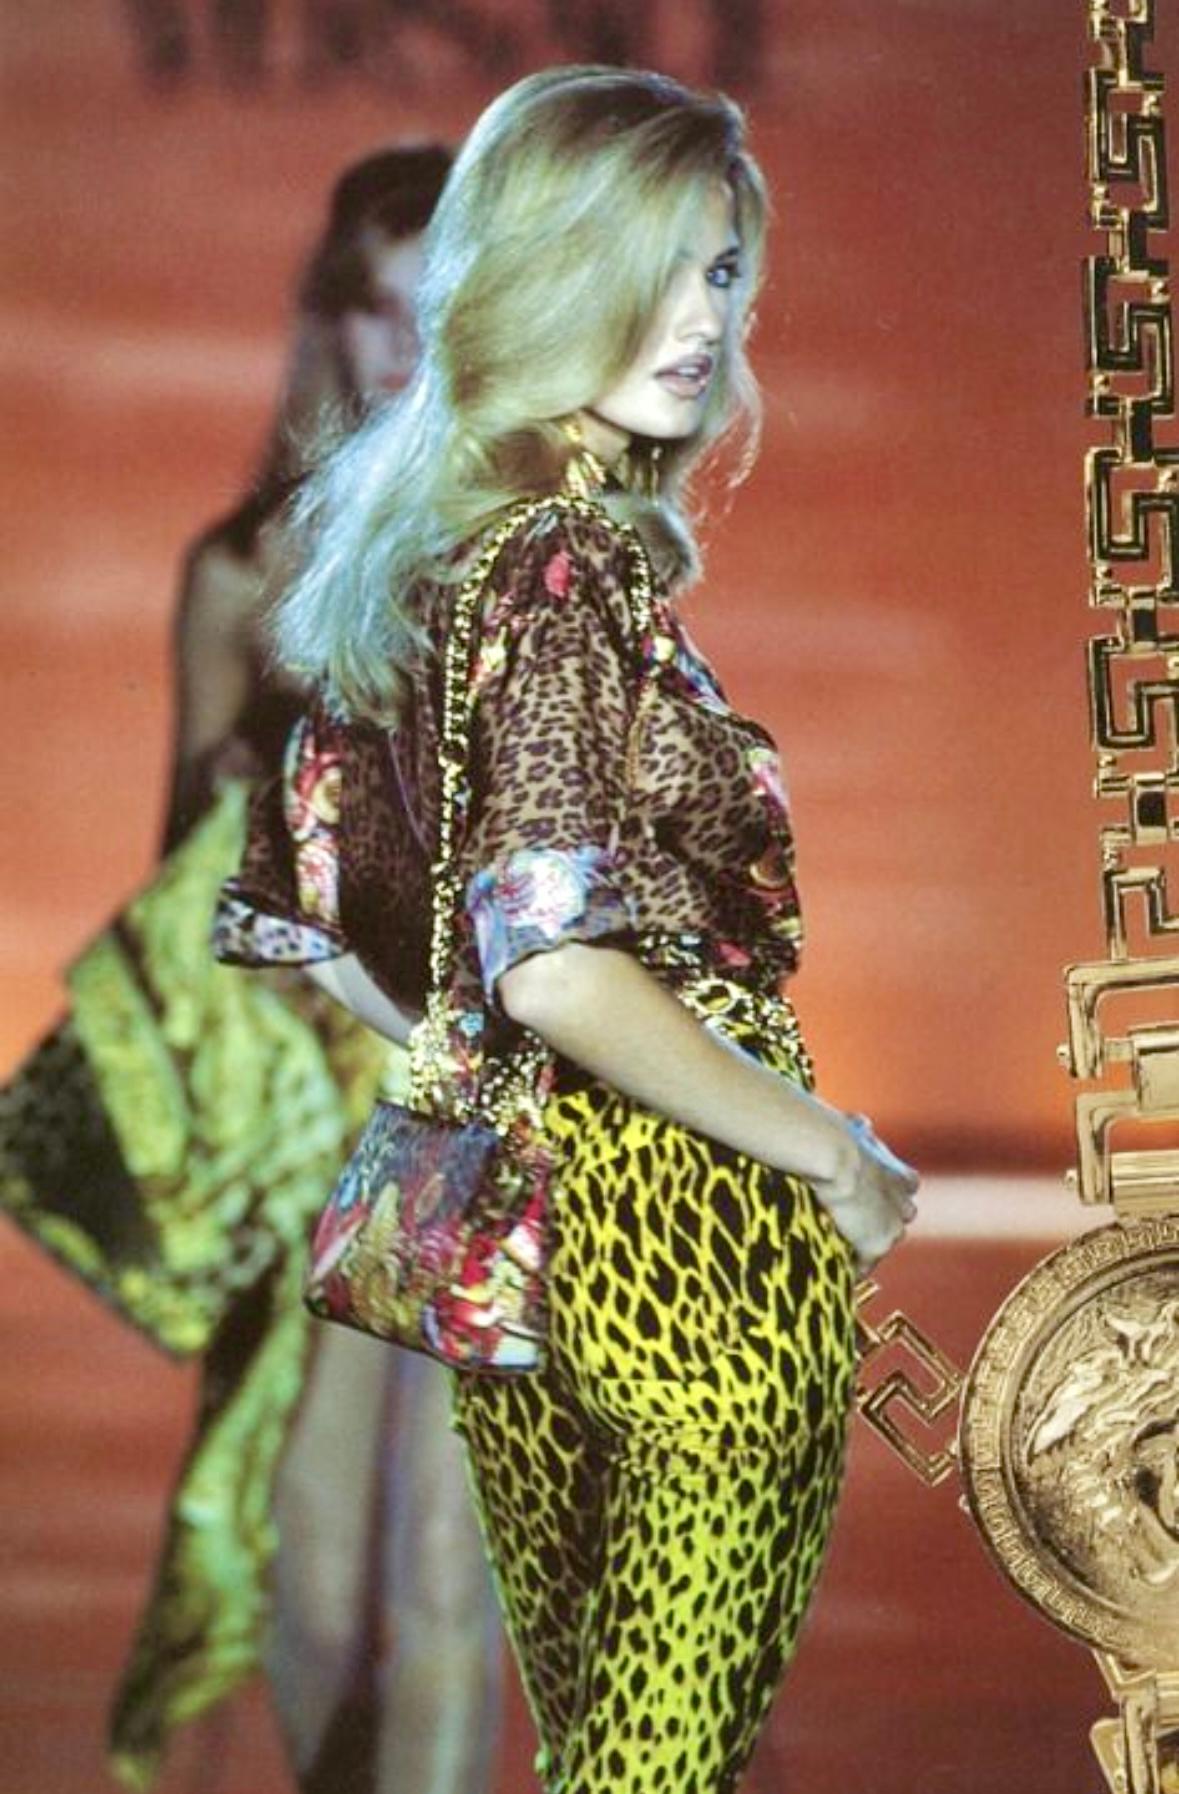 Presenting a truly incredible sea motif Gianni Versace shoulder bag, designed by Gianni Versace. From the Spring/Summer 1992 collection, this bag debuted on the season’s runway as part of look 22, modeled by Karen Mulder. This canvas bag features a